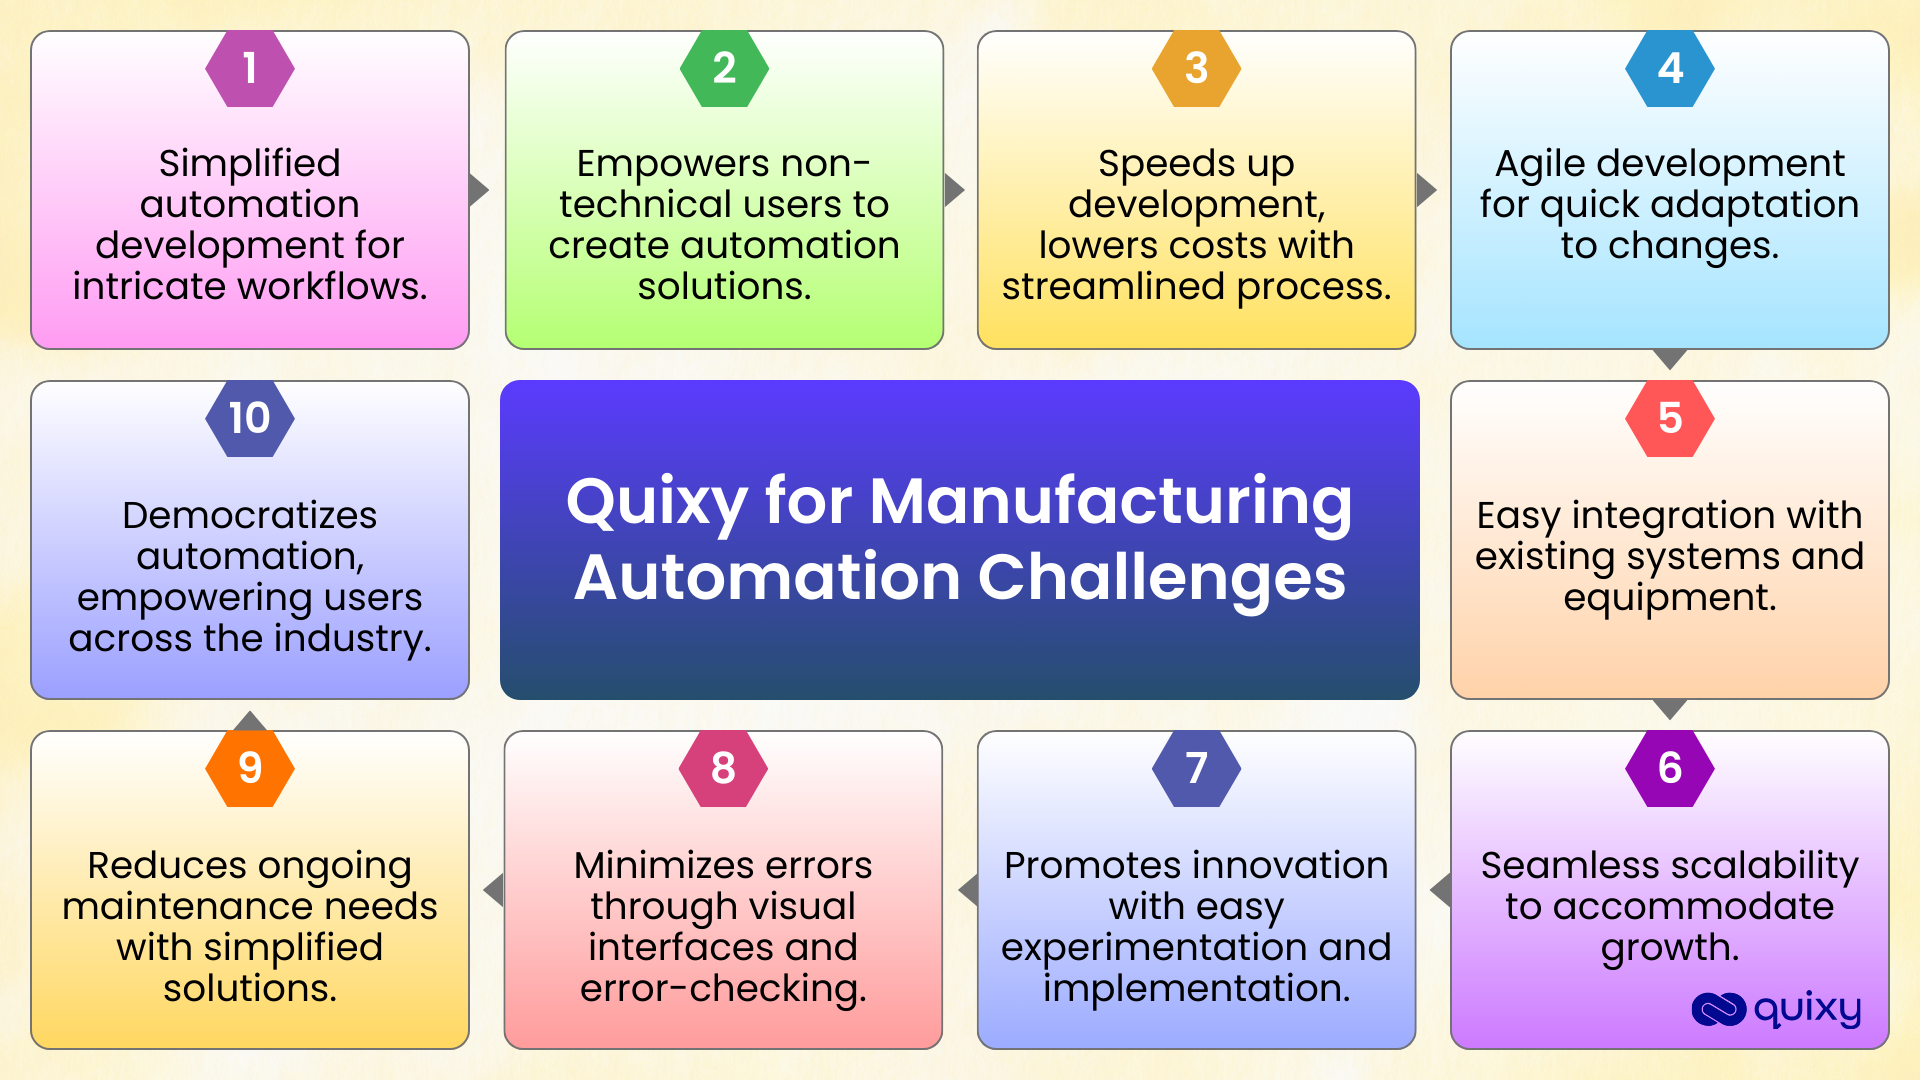 Quixy for Manufacturing Automation Challenges